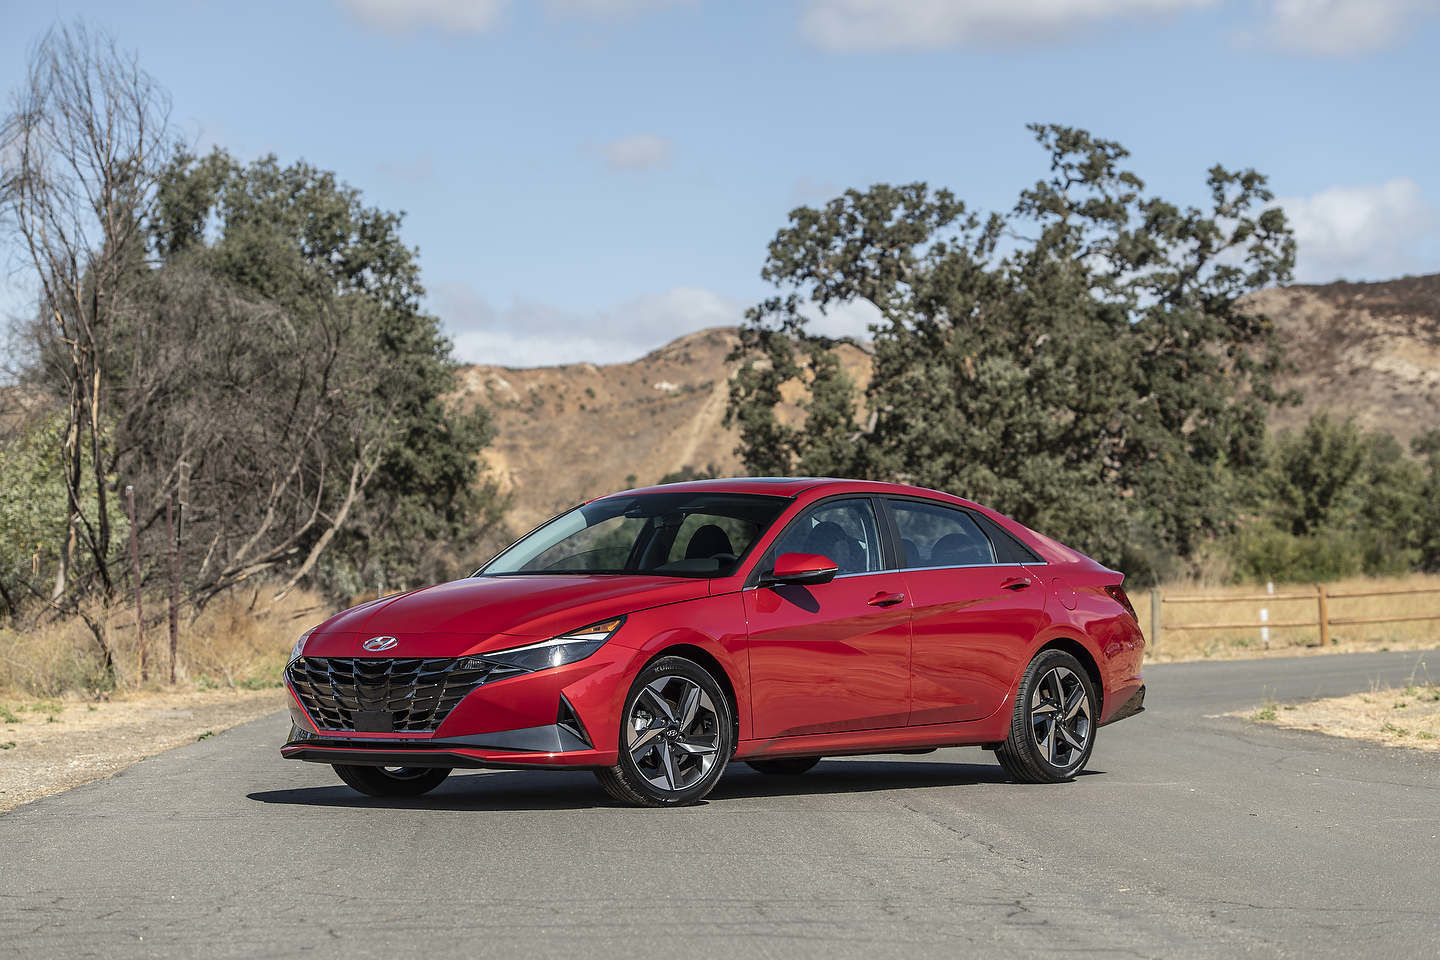 What Makes the Hyundai Elantra a Great Pre-Owned Vehicle?